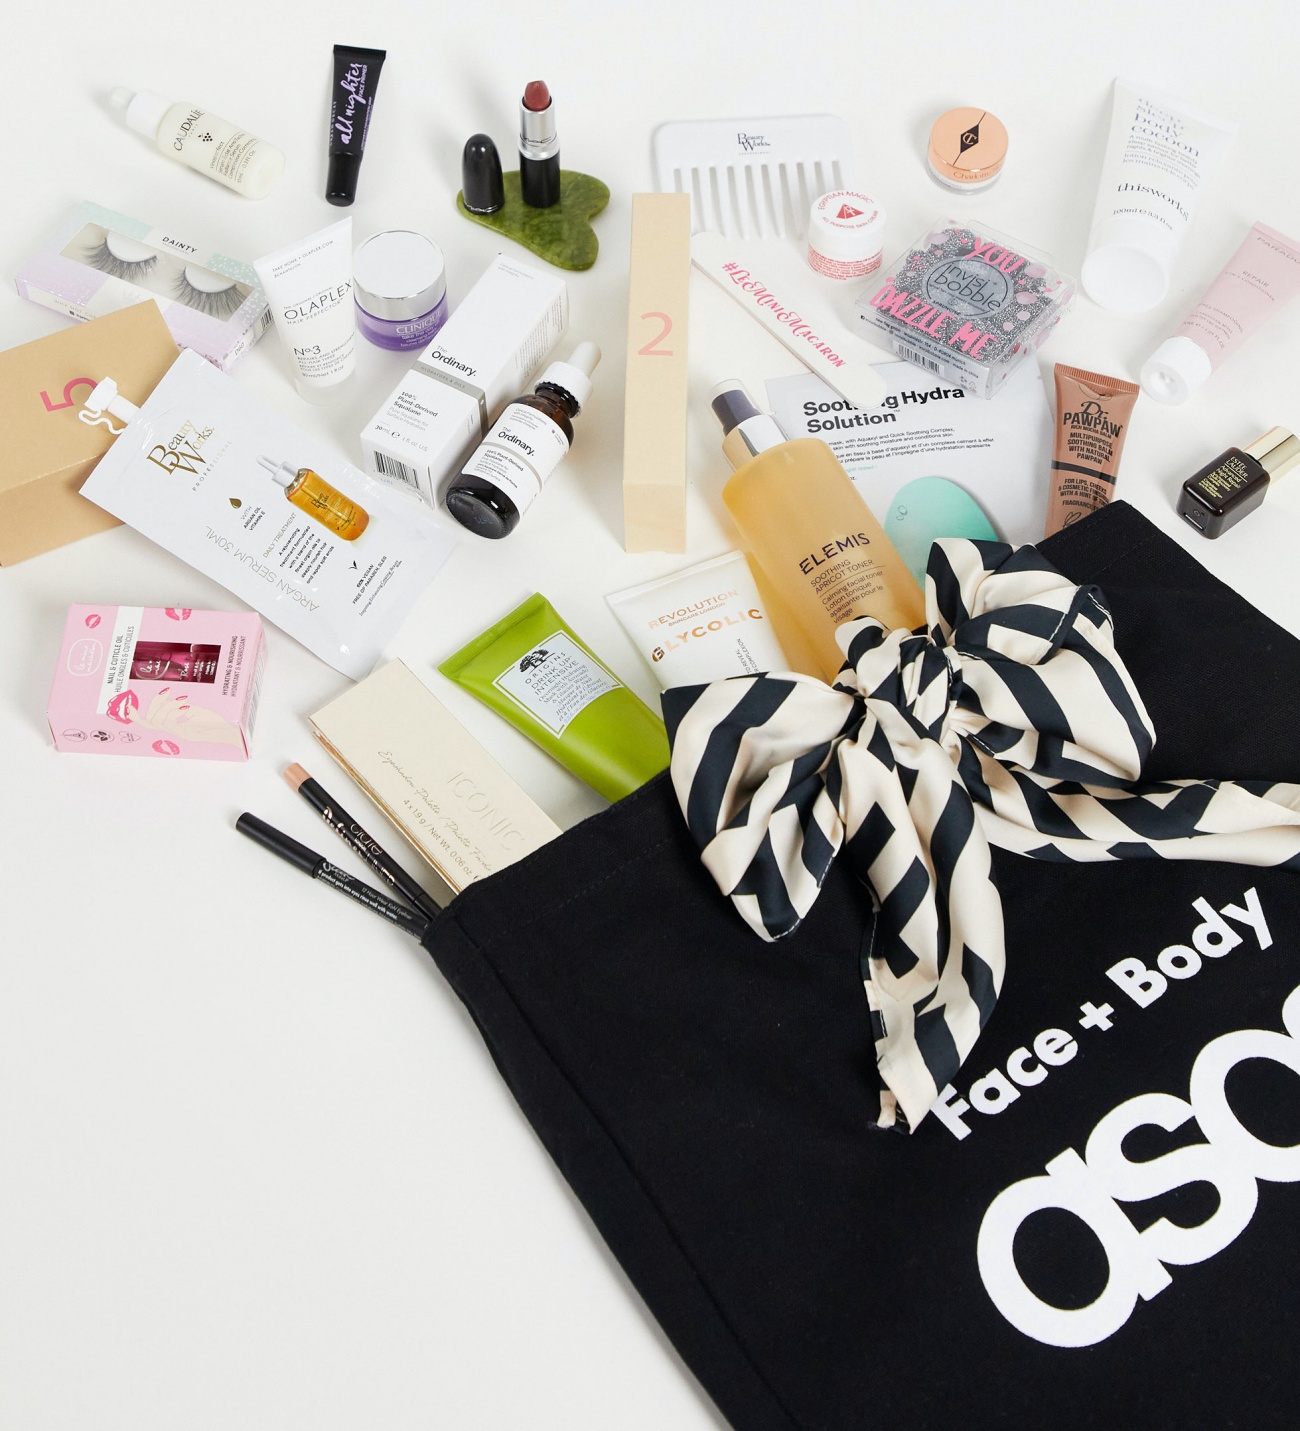 ASOS Beauty Advent Calendars 2021 Available Now! Contents & Release